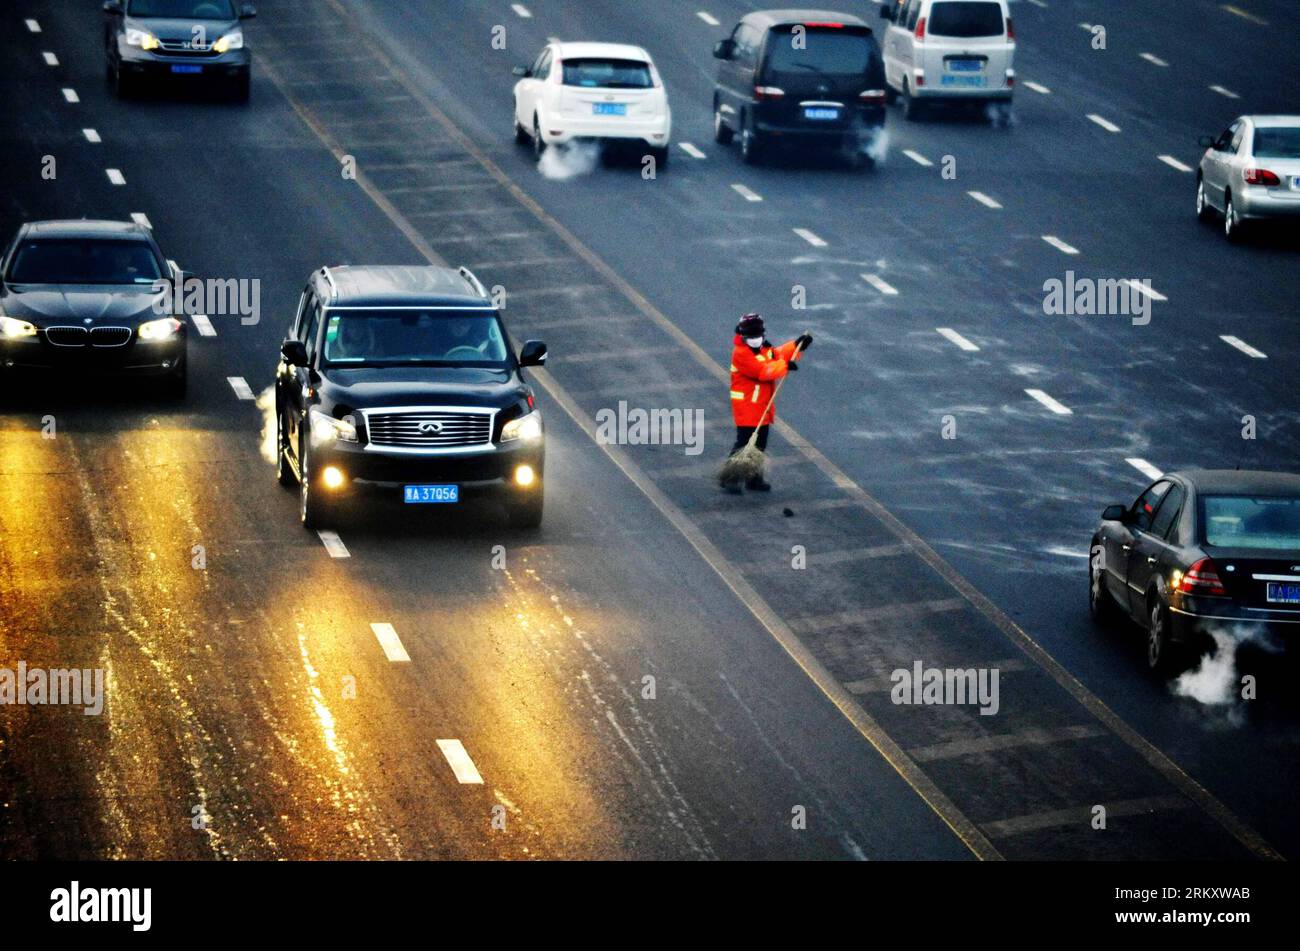 Bildnummer: 59095357  Datum: 16.01.2013  Copyright: imago/Xinhua HARBIN, Jan. 16, 2013 (Xinhua) -- Sanitation worker Yang Weixia works in the middle of a road in Harbin, capital of northeast China s Heilongjiang Province, Jan. 16, 2013. Yang Weixia, 48, is an ordinary sanitation worker living in Harbin, a city known for its bitterly cold winters and often called the Ice City. For 32 years, Yang has never stopped sweating away at her work, though she often gets up at three o clock every morning and will not go back home until 9 in the evening in the cold winter. There are more than 10,000 sanit Stock Photo